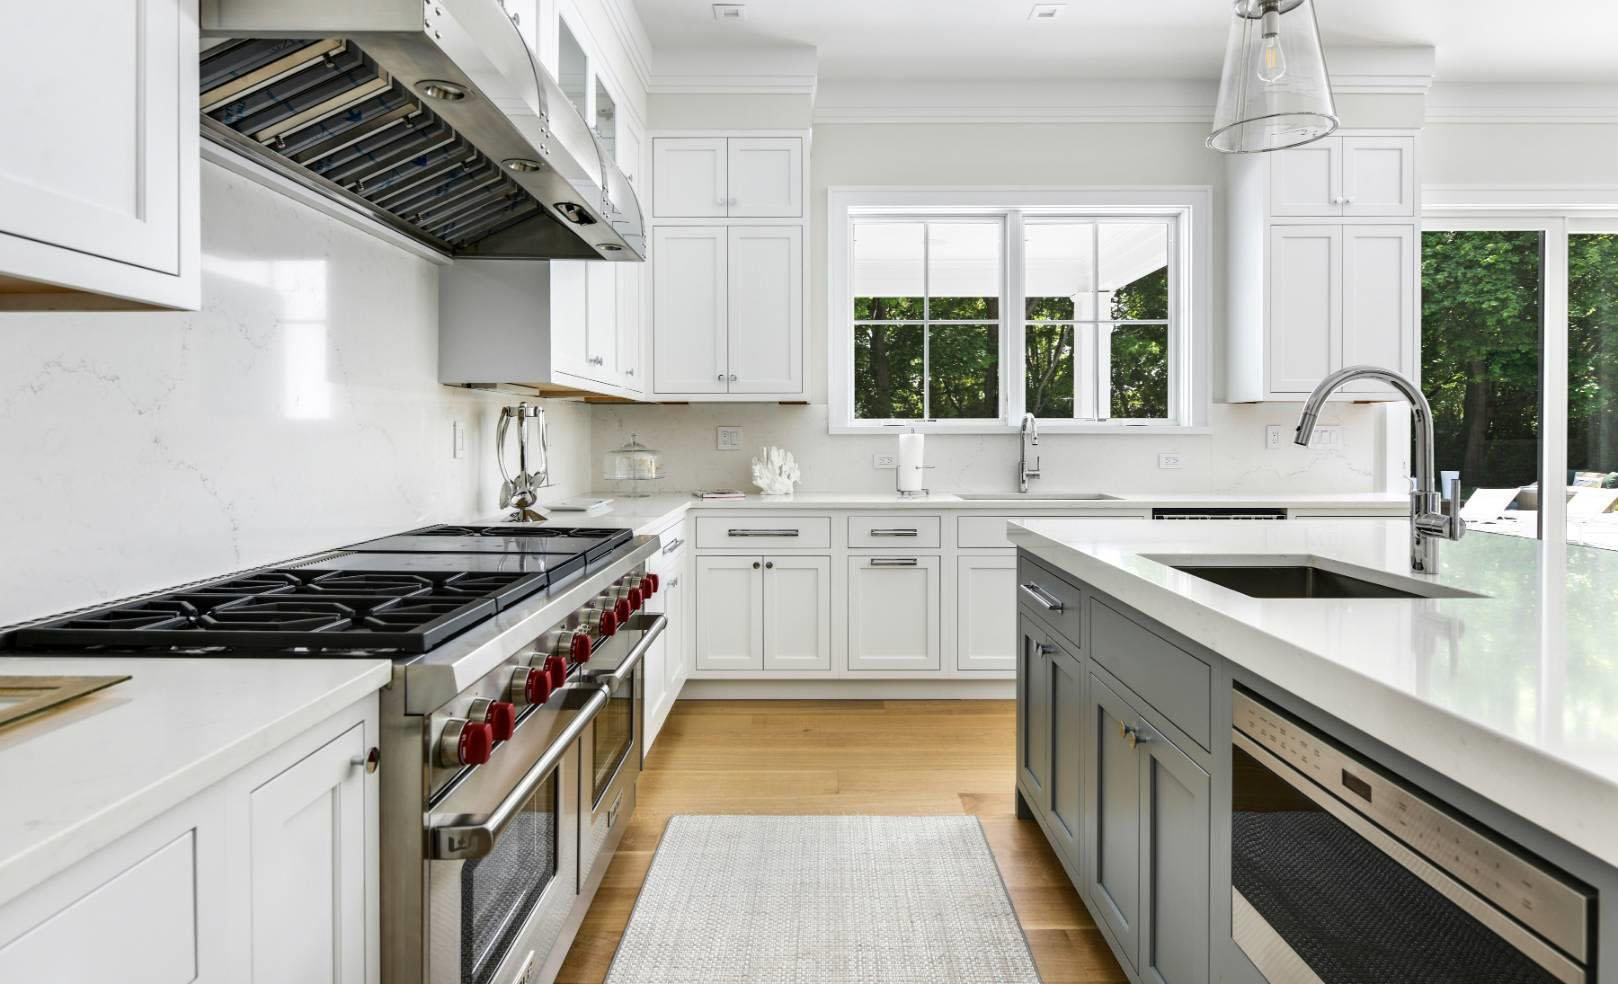 Beautiful kitchen with two tone white and gray cabinets. Marble quartz countertops with matching solid slab backsplash.